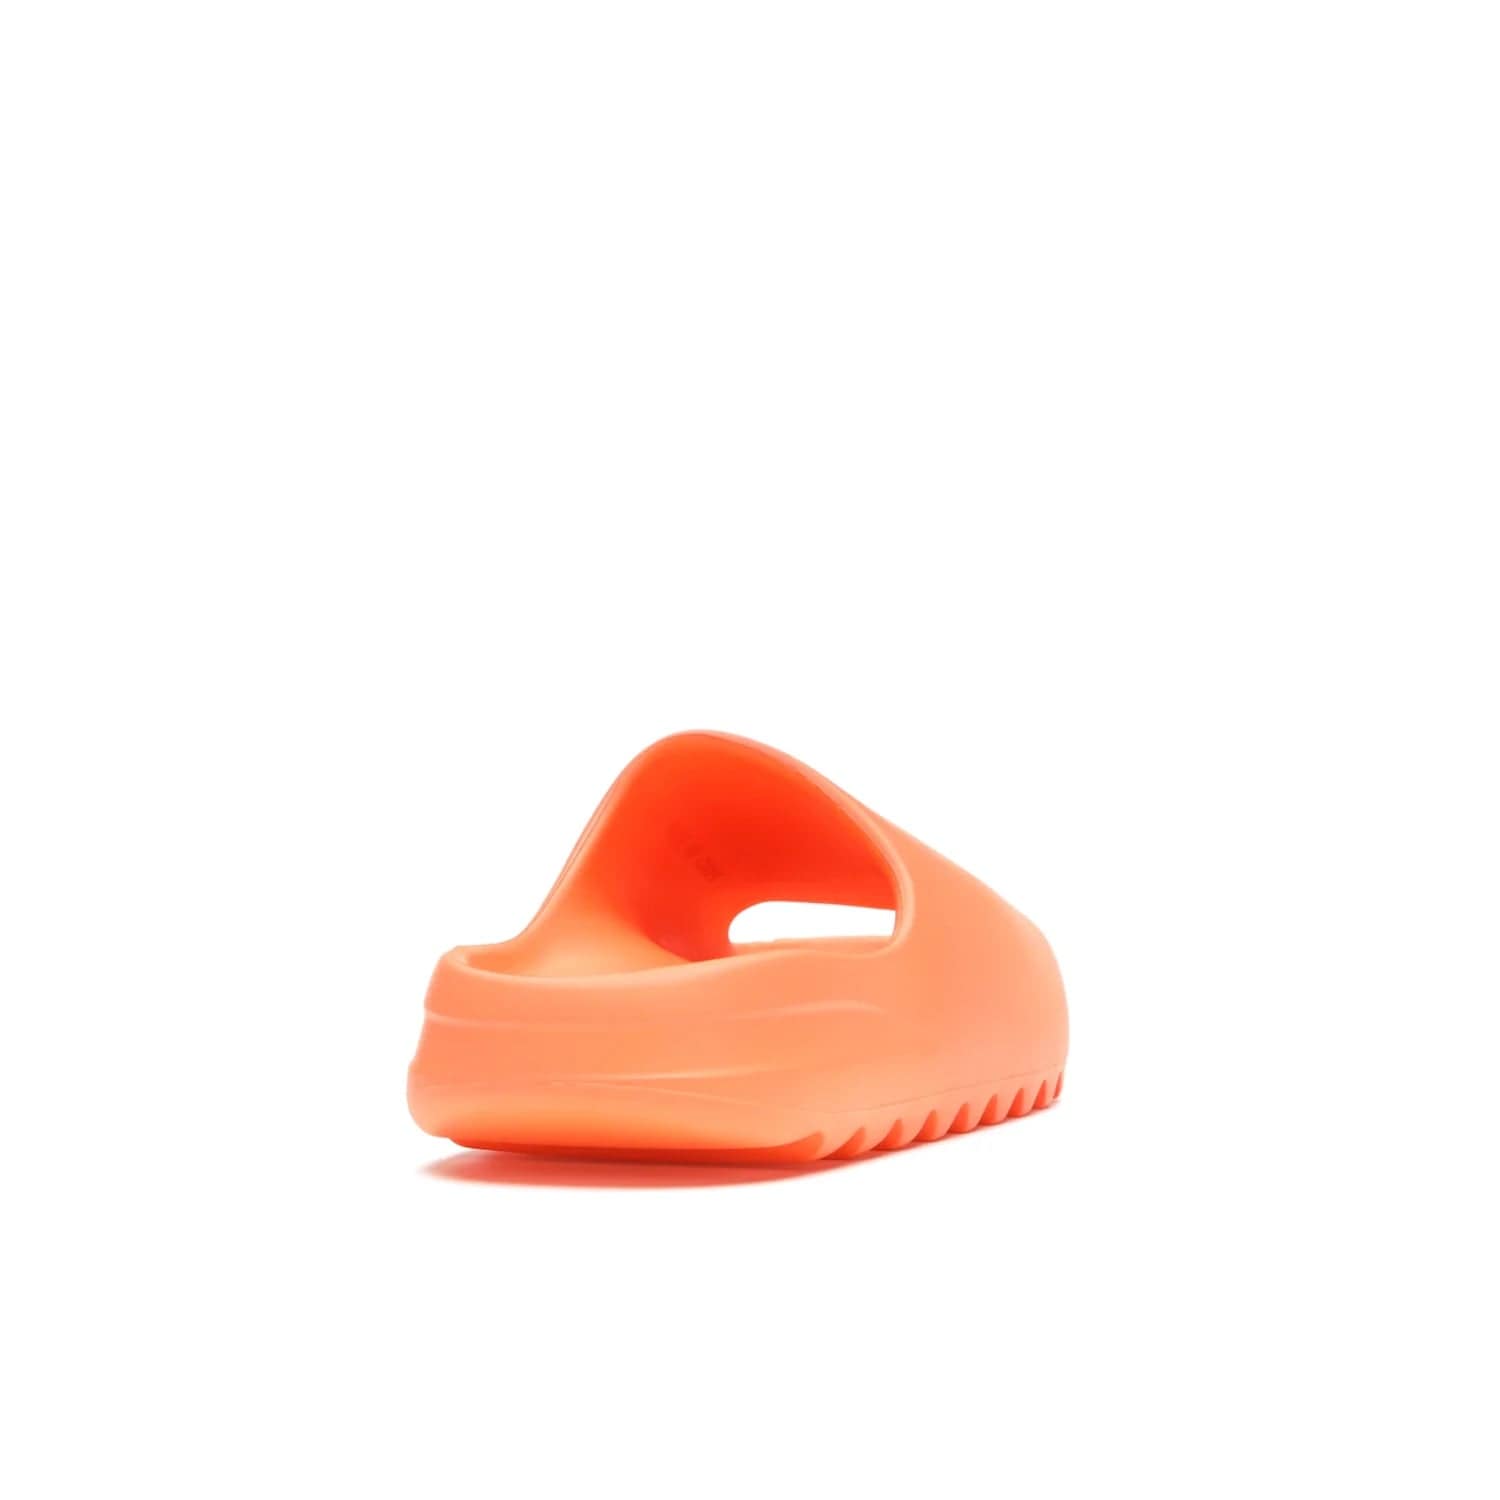 adidas Yeezy Slide Enflame Orange - Image 30 - Only at www.BallersClubKickz.com - Limited edition adidas Yeezy Slide featuring a bold Enflame Orange upper and EVA foam construction. Grooved outsole for traction and support. Released June 2021. Perfect for summer.